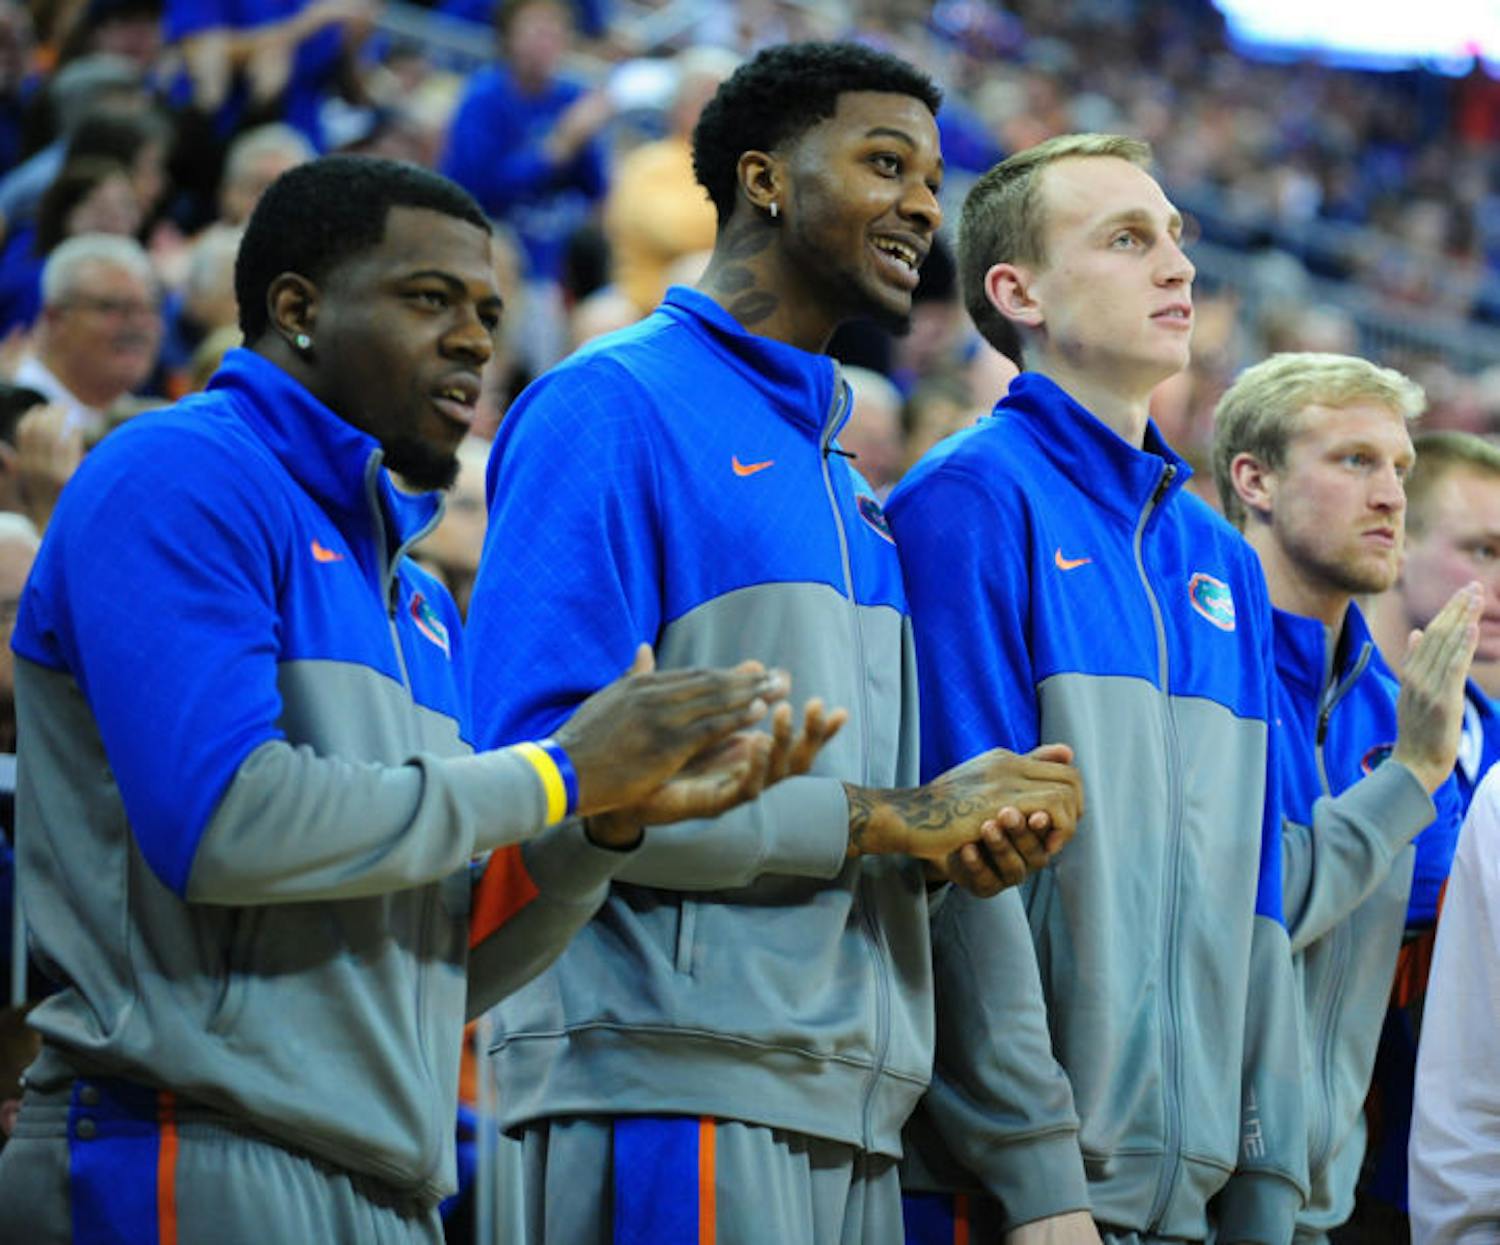 Chris Walker (middle) watches from the bench during Florida’s 74-58 win against South Carolina on Jan. 8 in the O’Connell Center. Walker is expected to make his college debut against Missouri tonight at 9 p.m.